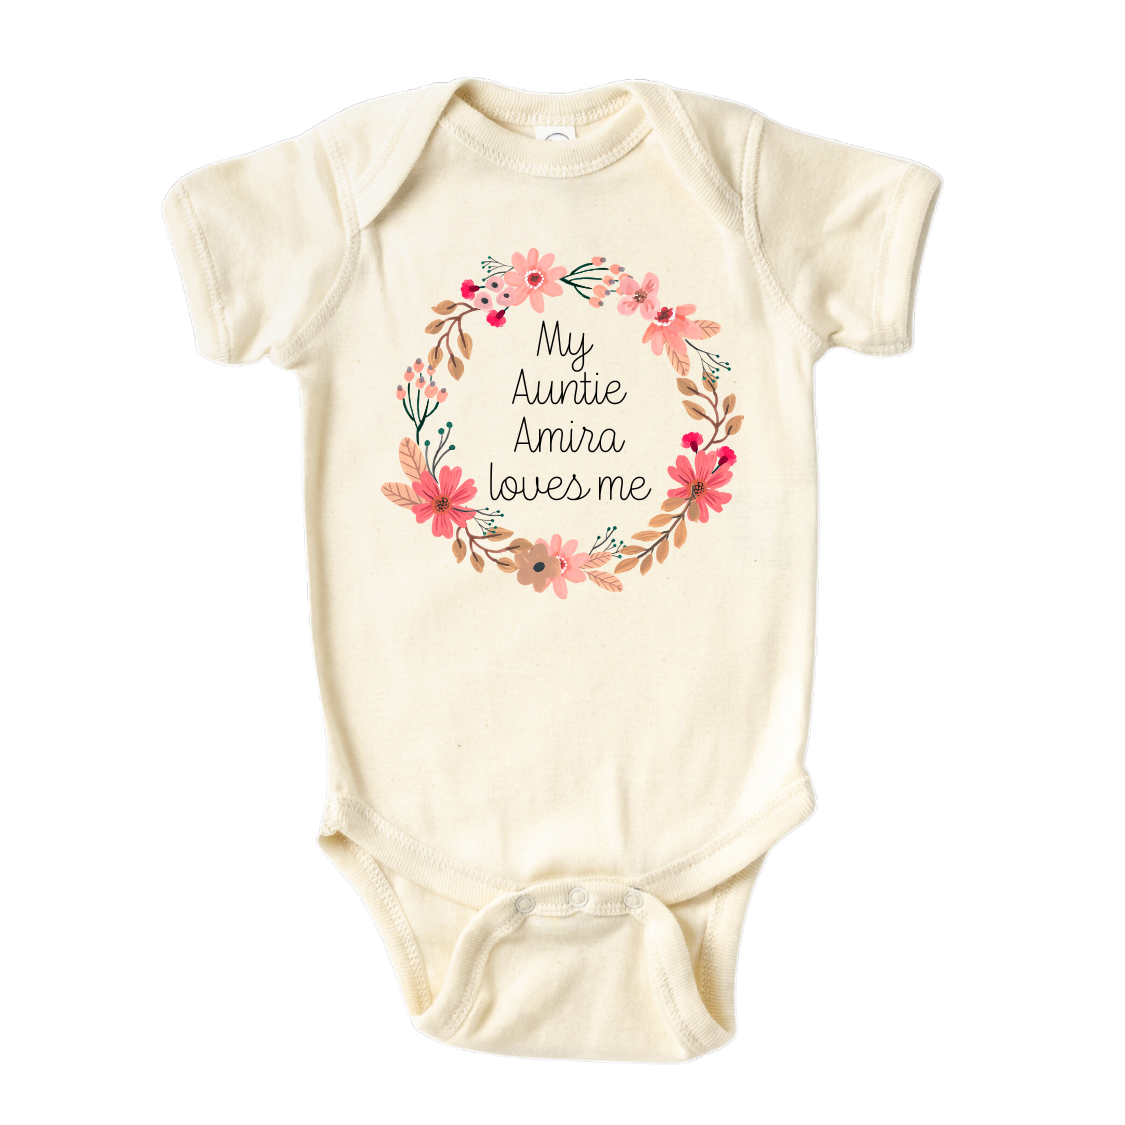 Natural Baby Onesie featuring a floral wreath design and customizable text 'My Auntie Loves Me.